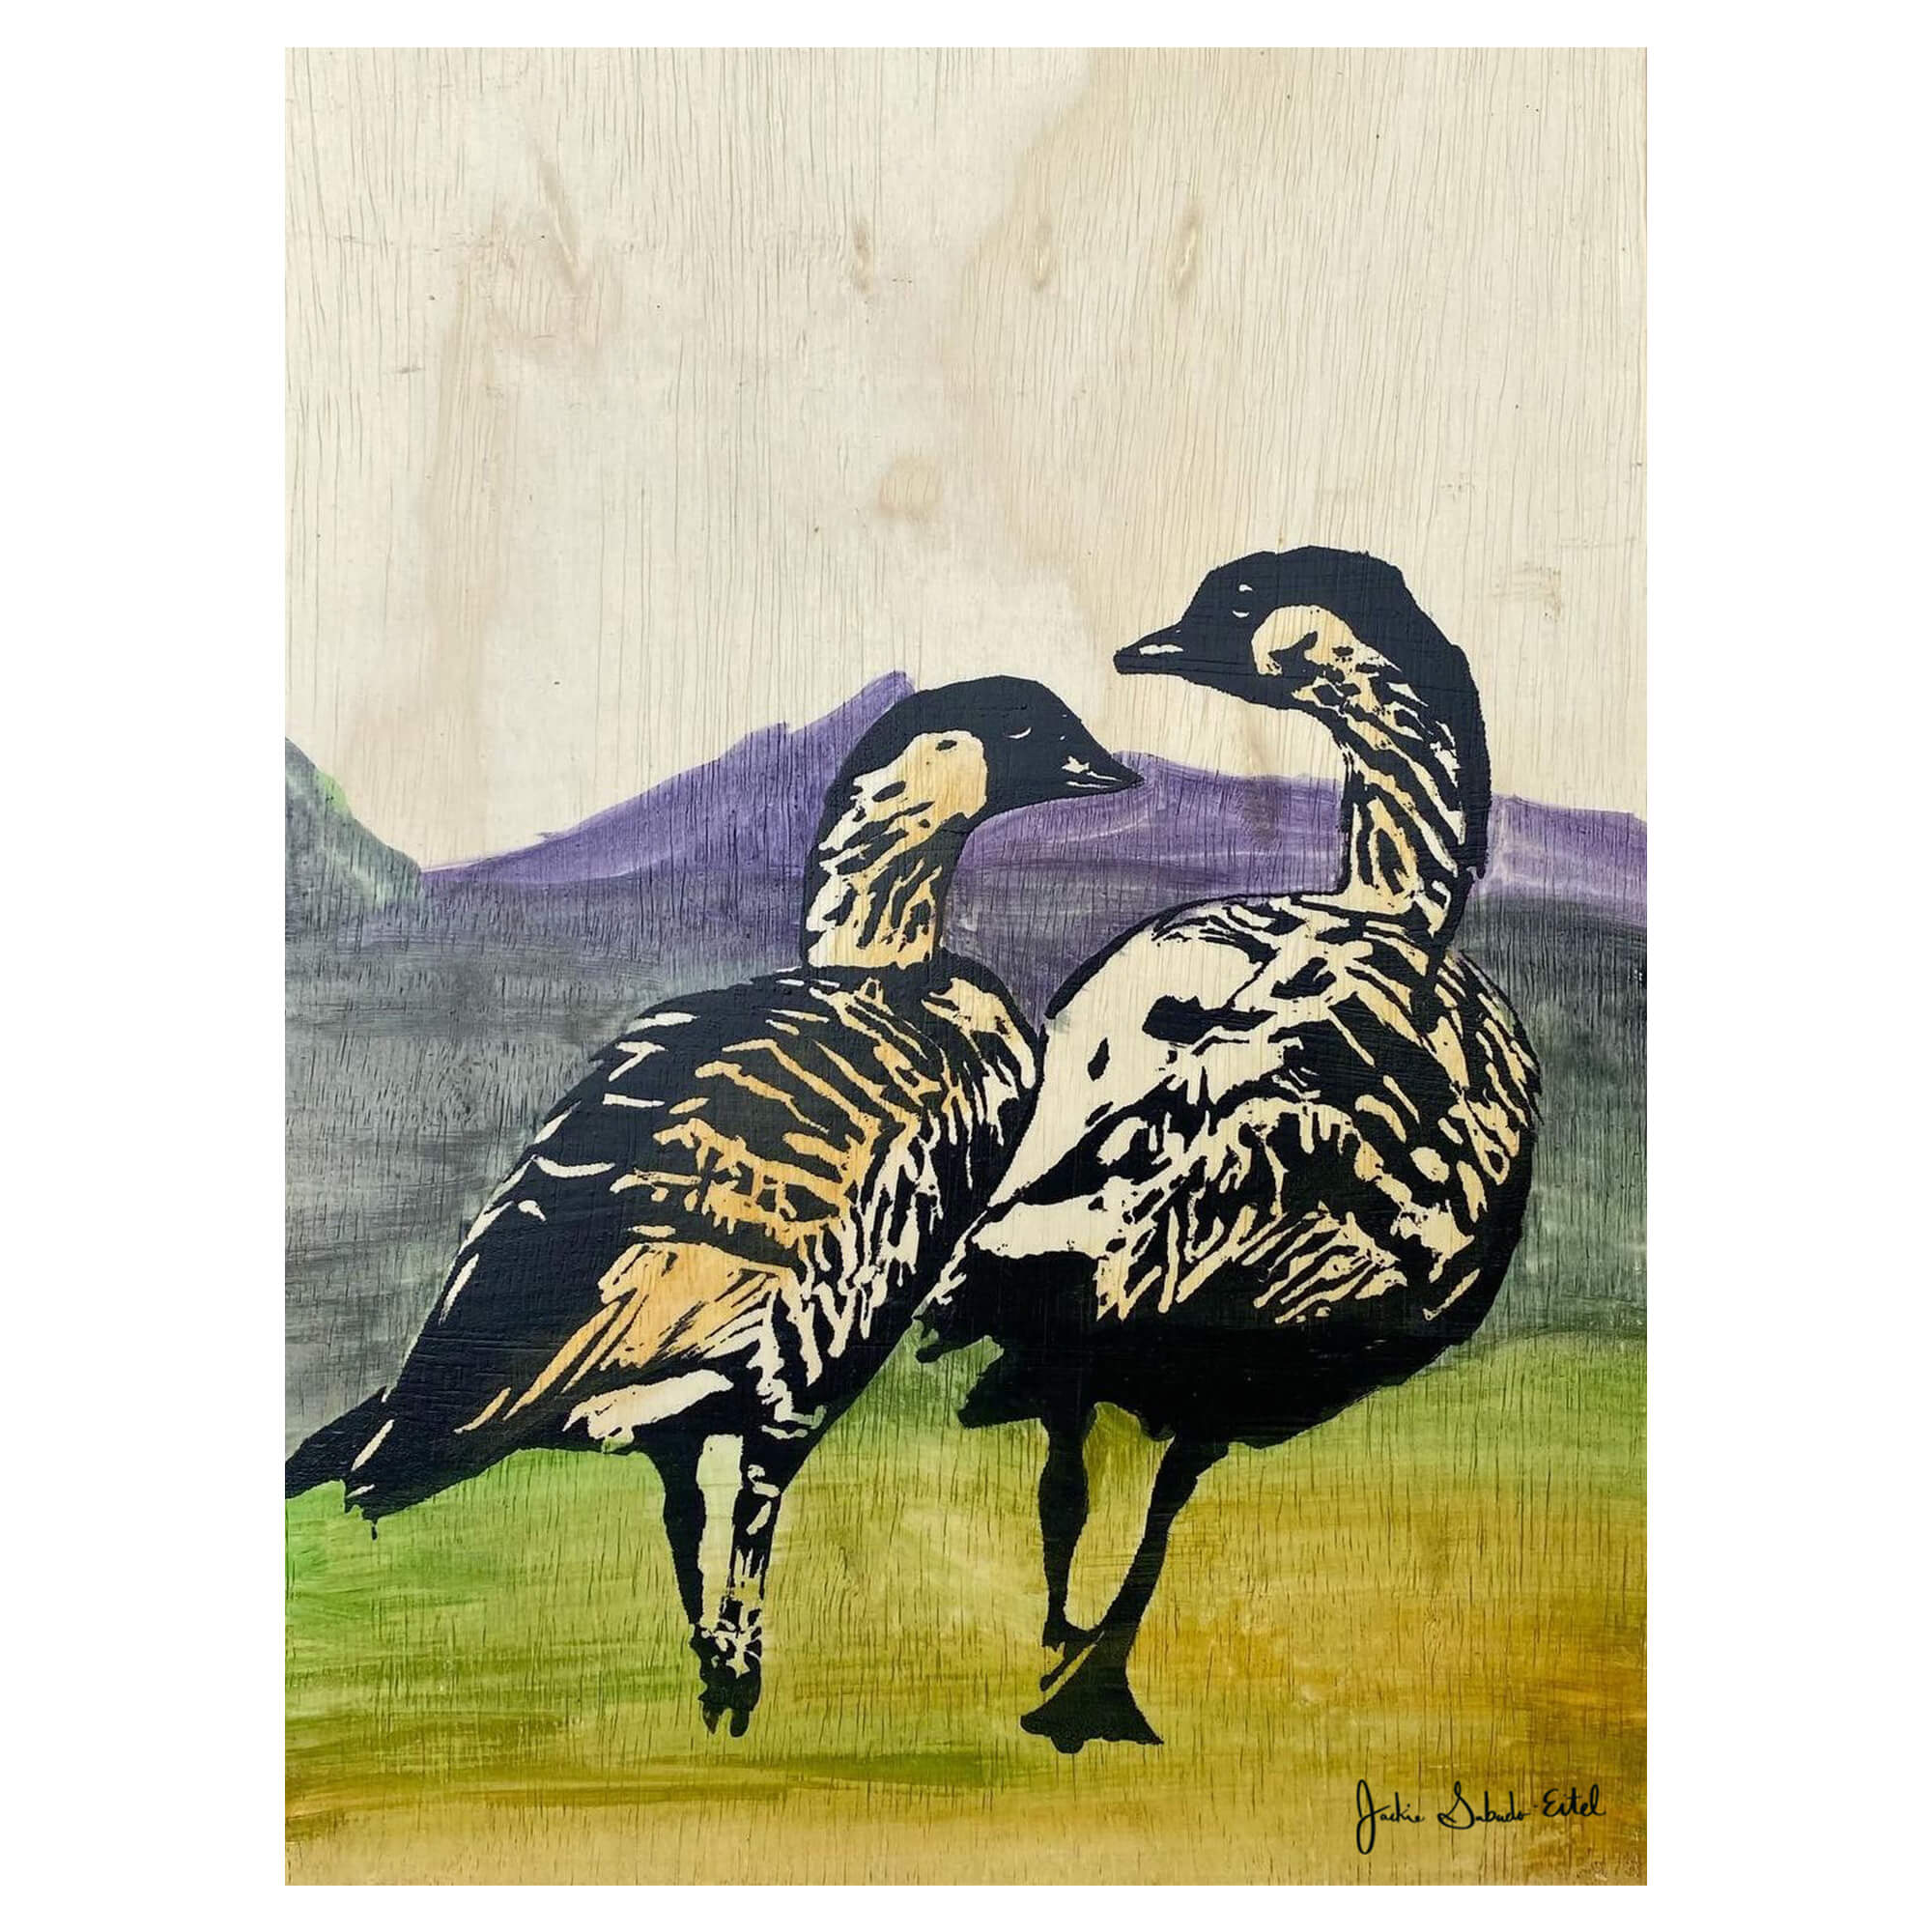 A matted art print featuring two ducks walking while enjoying the colorful landscapes of Hawaii by Hawaii artist Jackie Eitel